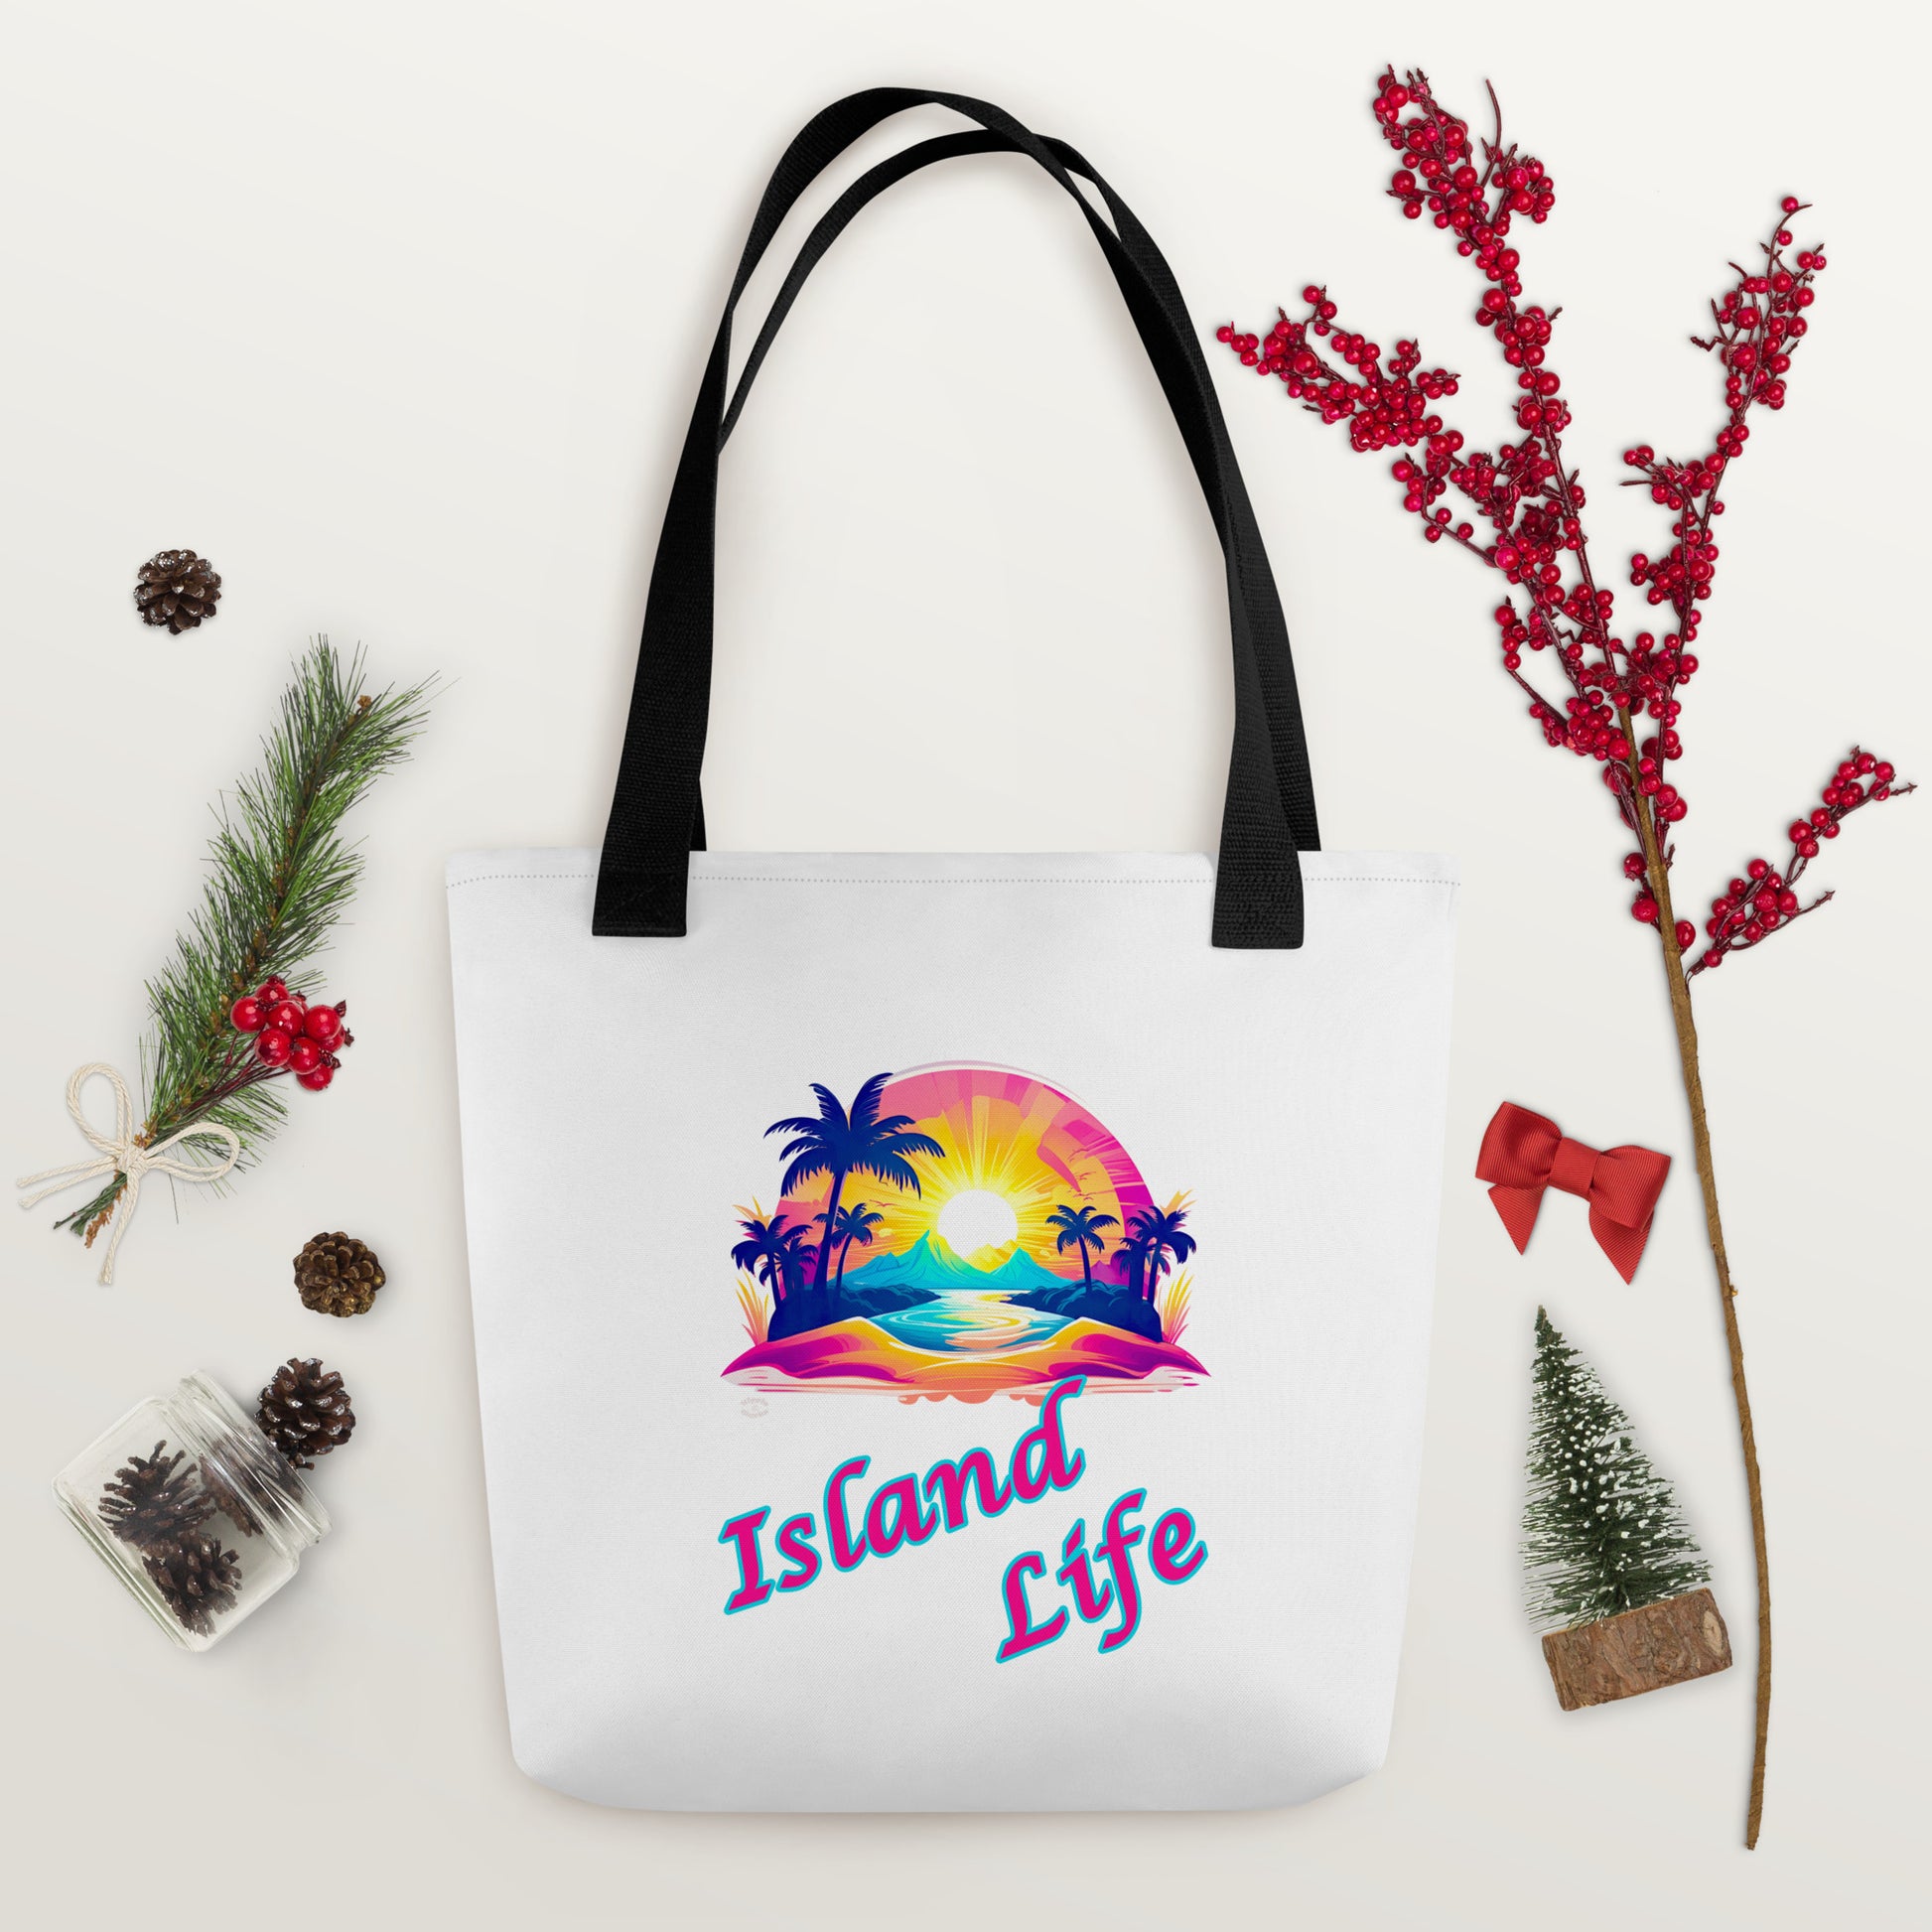 A picture of a Island Life Tote bag with a large picture of a tropical island paradise and the text Island Life underneath - black handles